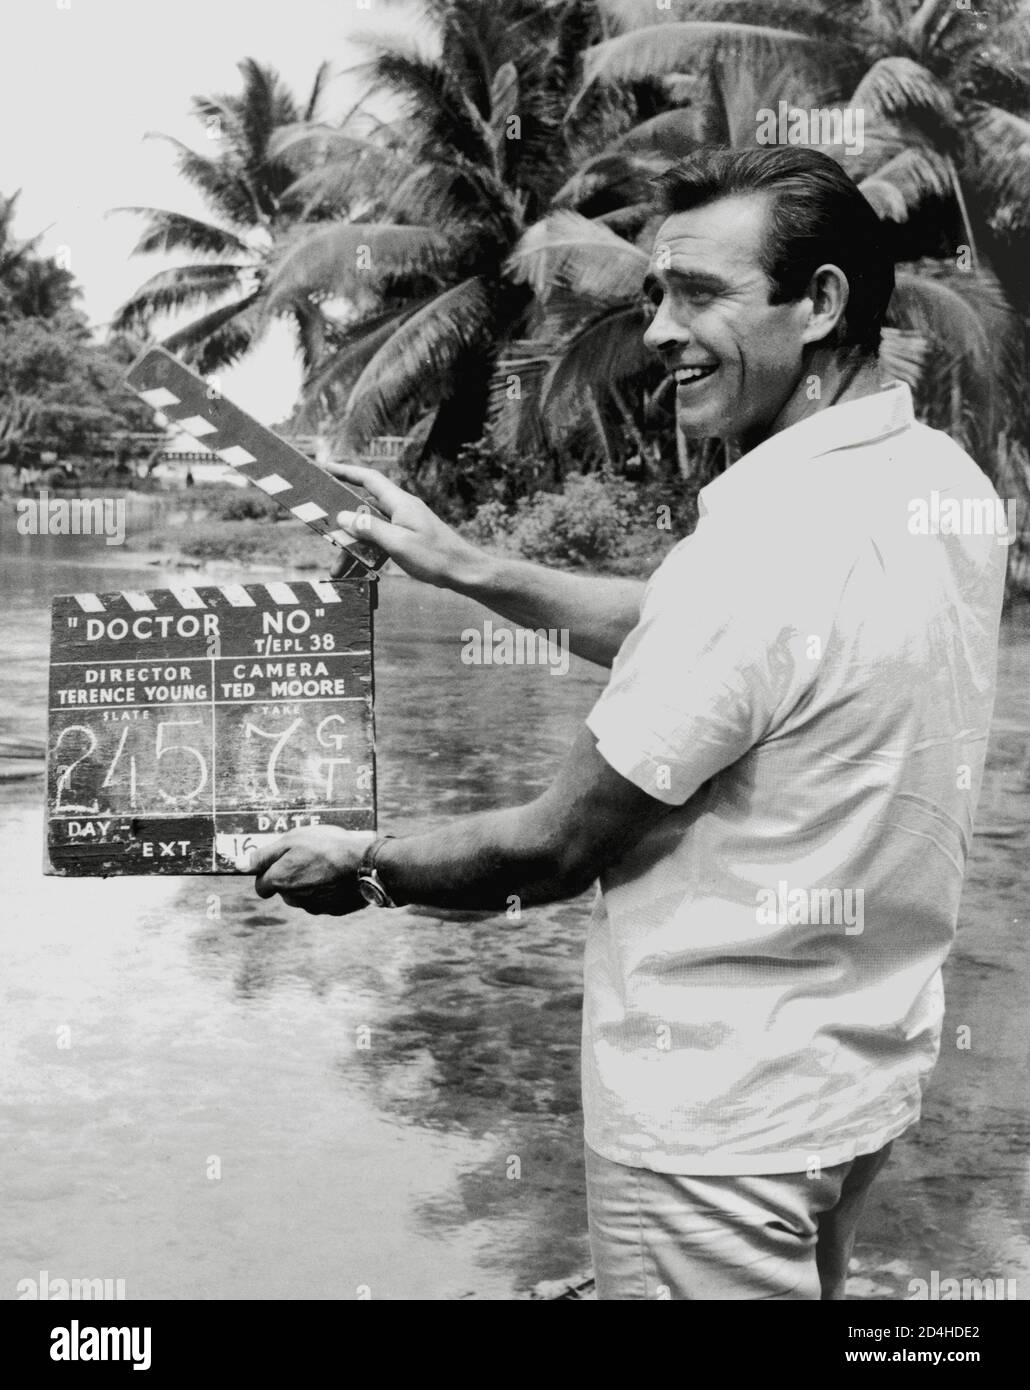 Sean Connery als James Bond Dr. No' (1962) United Artists / File Reference # 34000-648THA Stockfoto